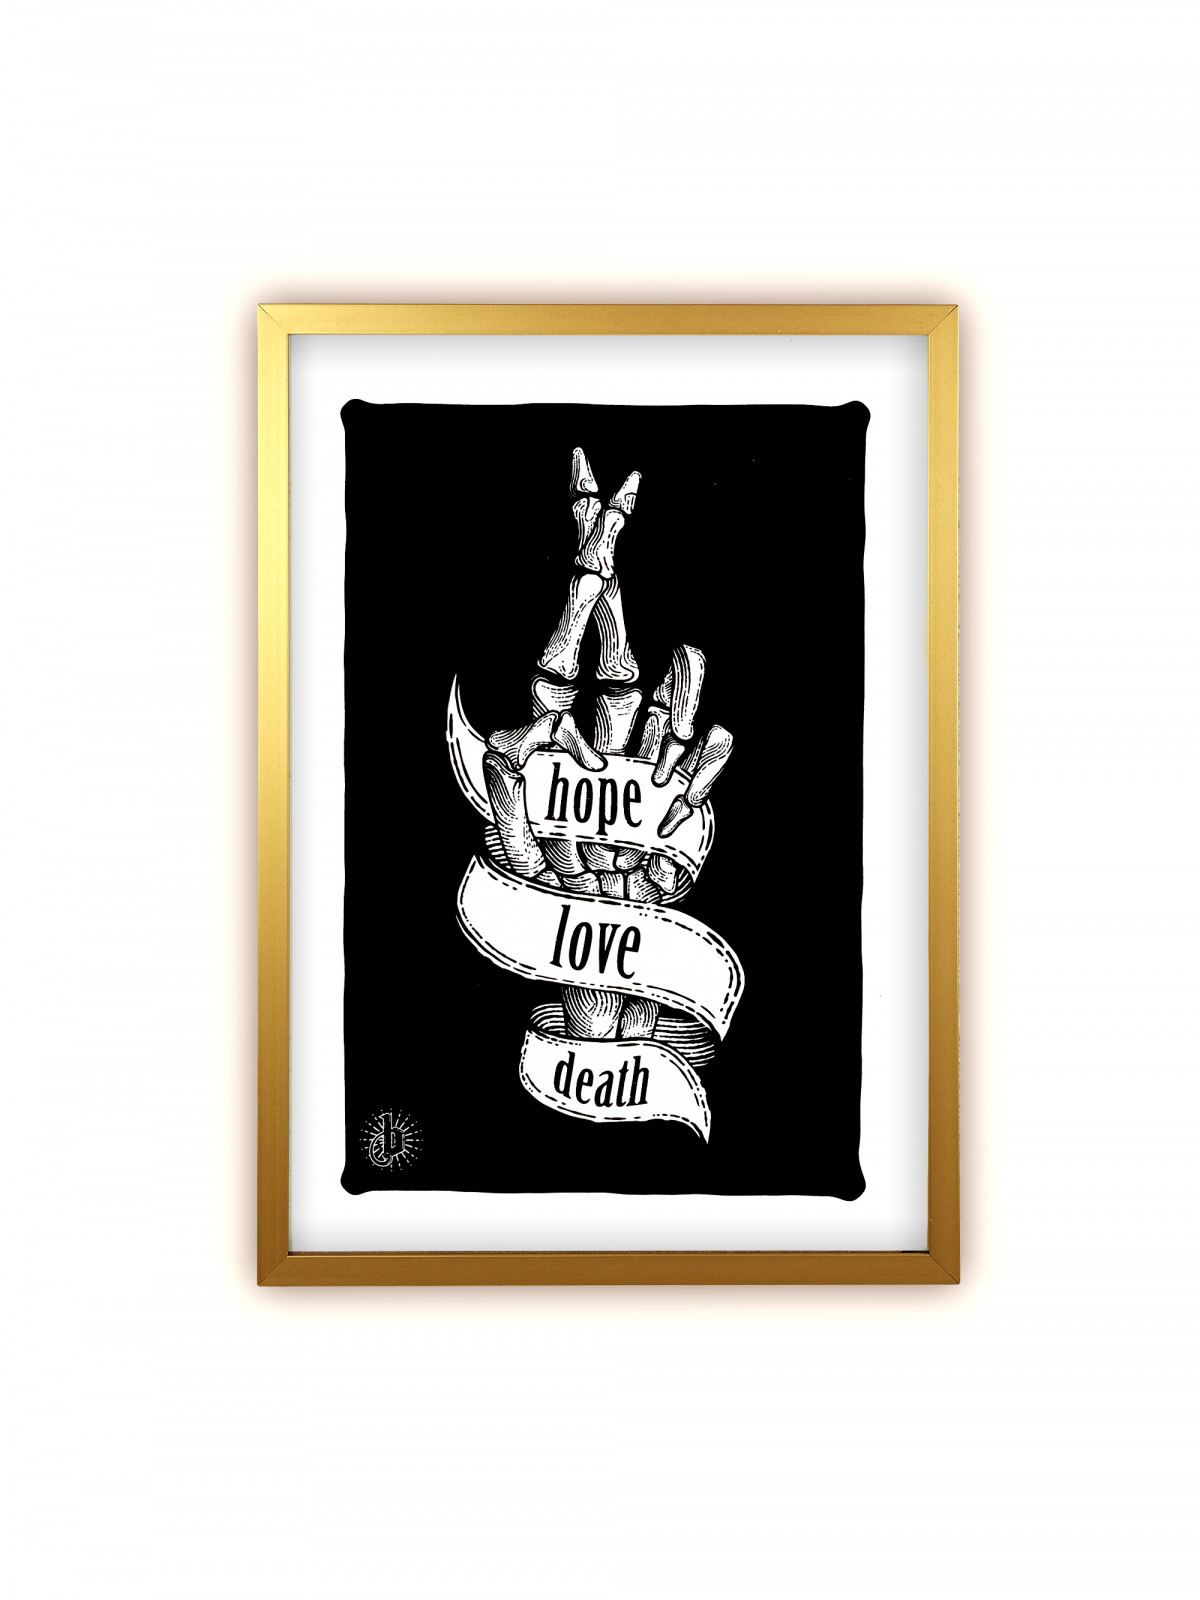 Art print of our own design 'Hope Love Death' by swiss streetwear brand bastonnade clothing.